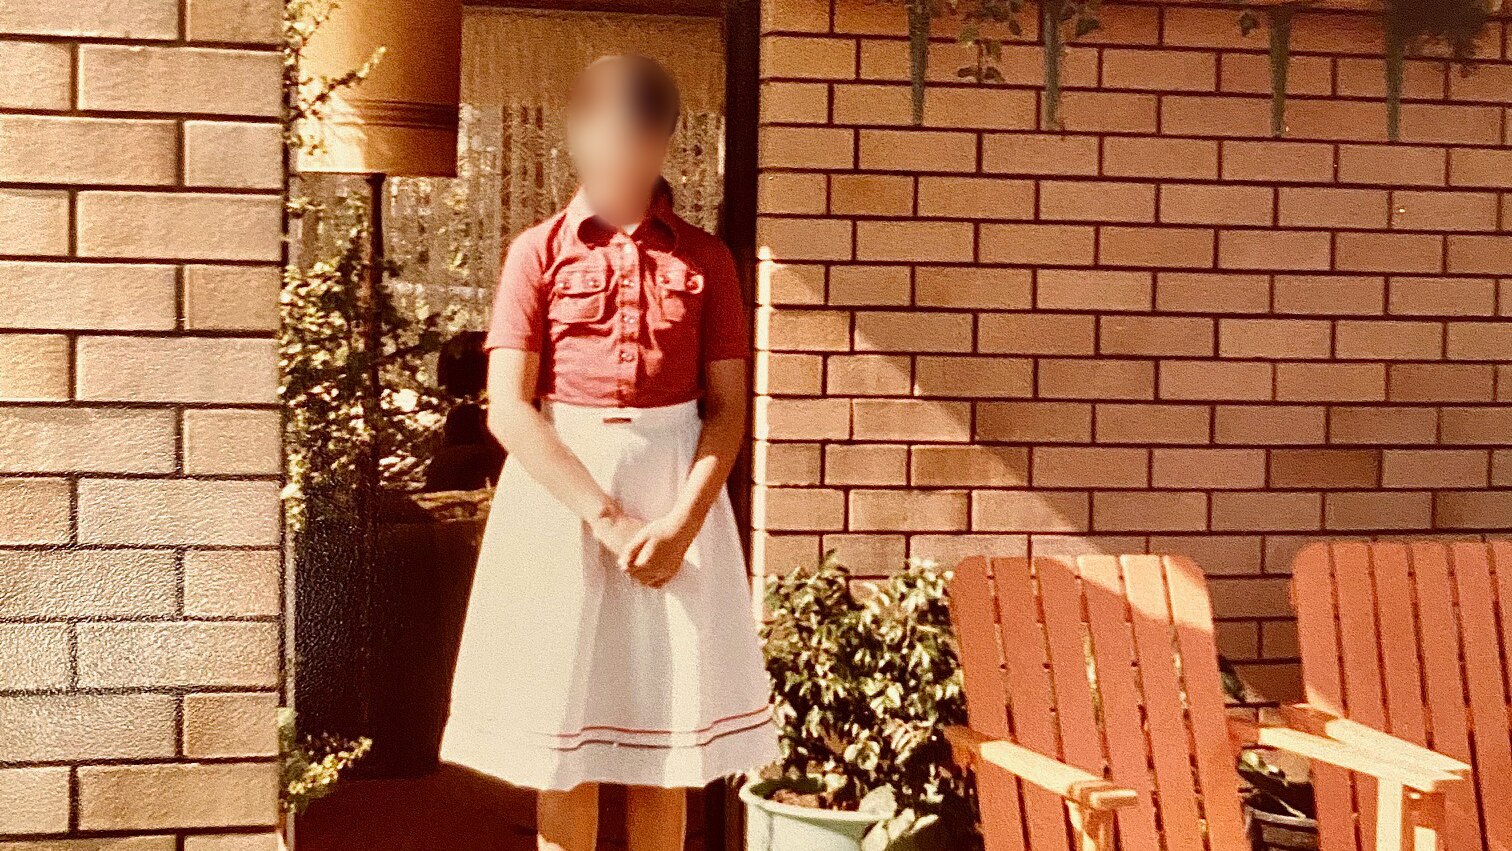 fbi investigating two by twos for historical child sexual abuse claims, including in australia